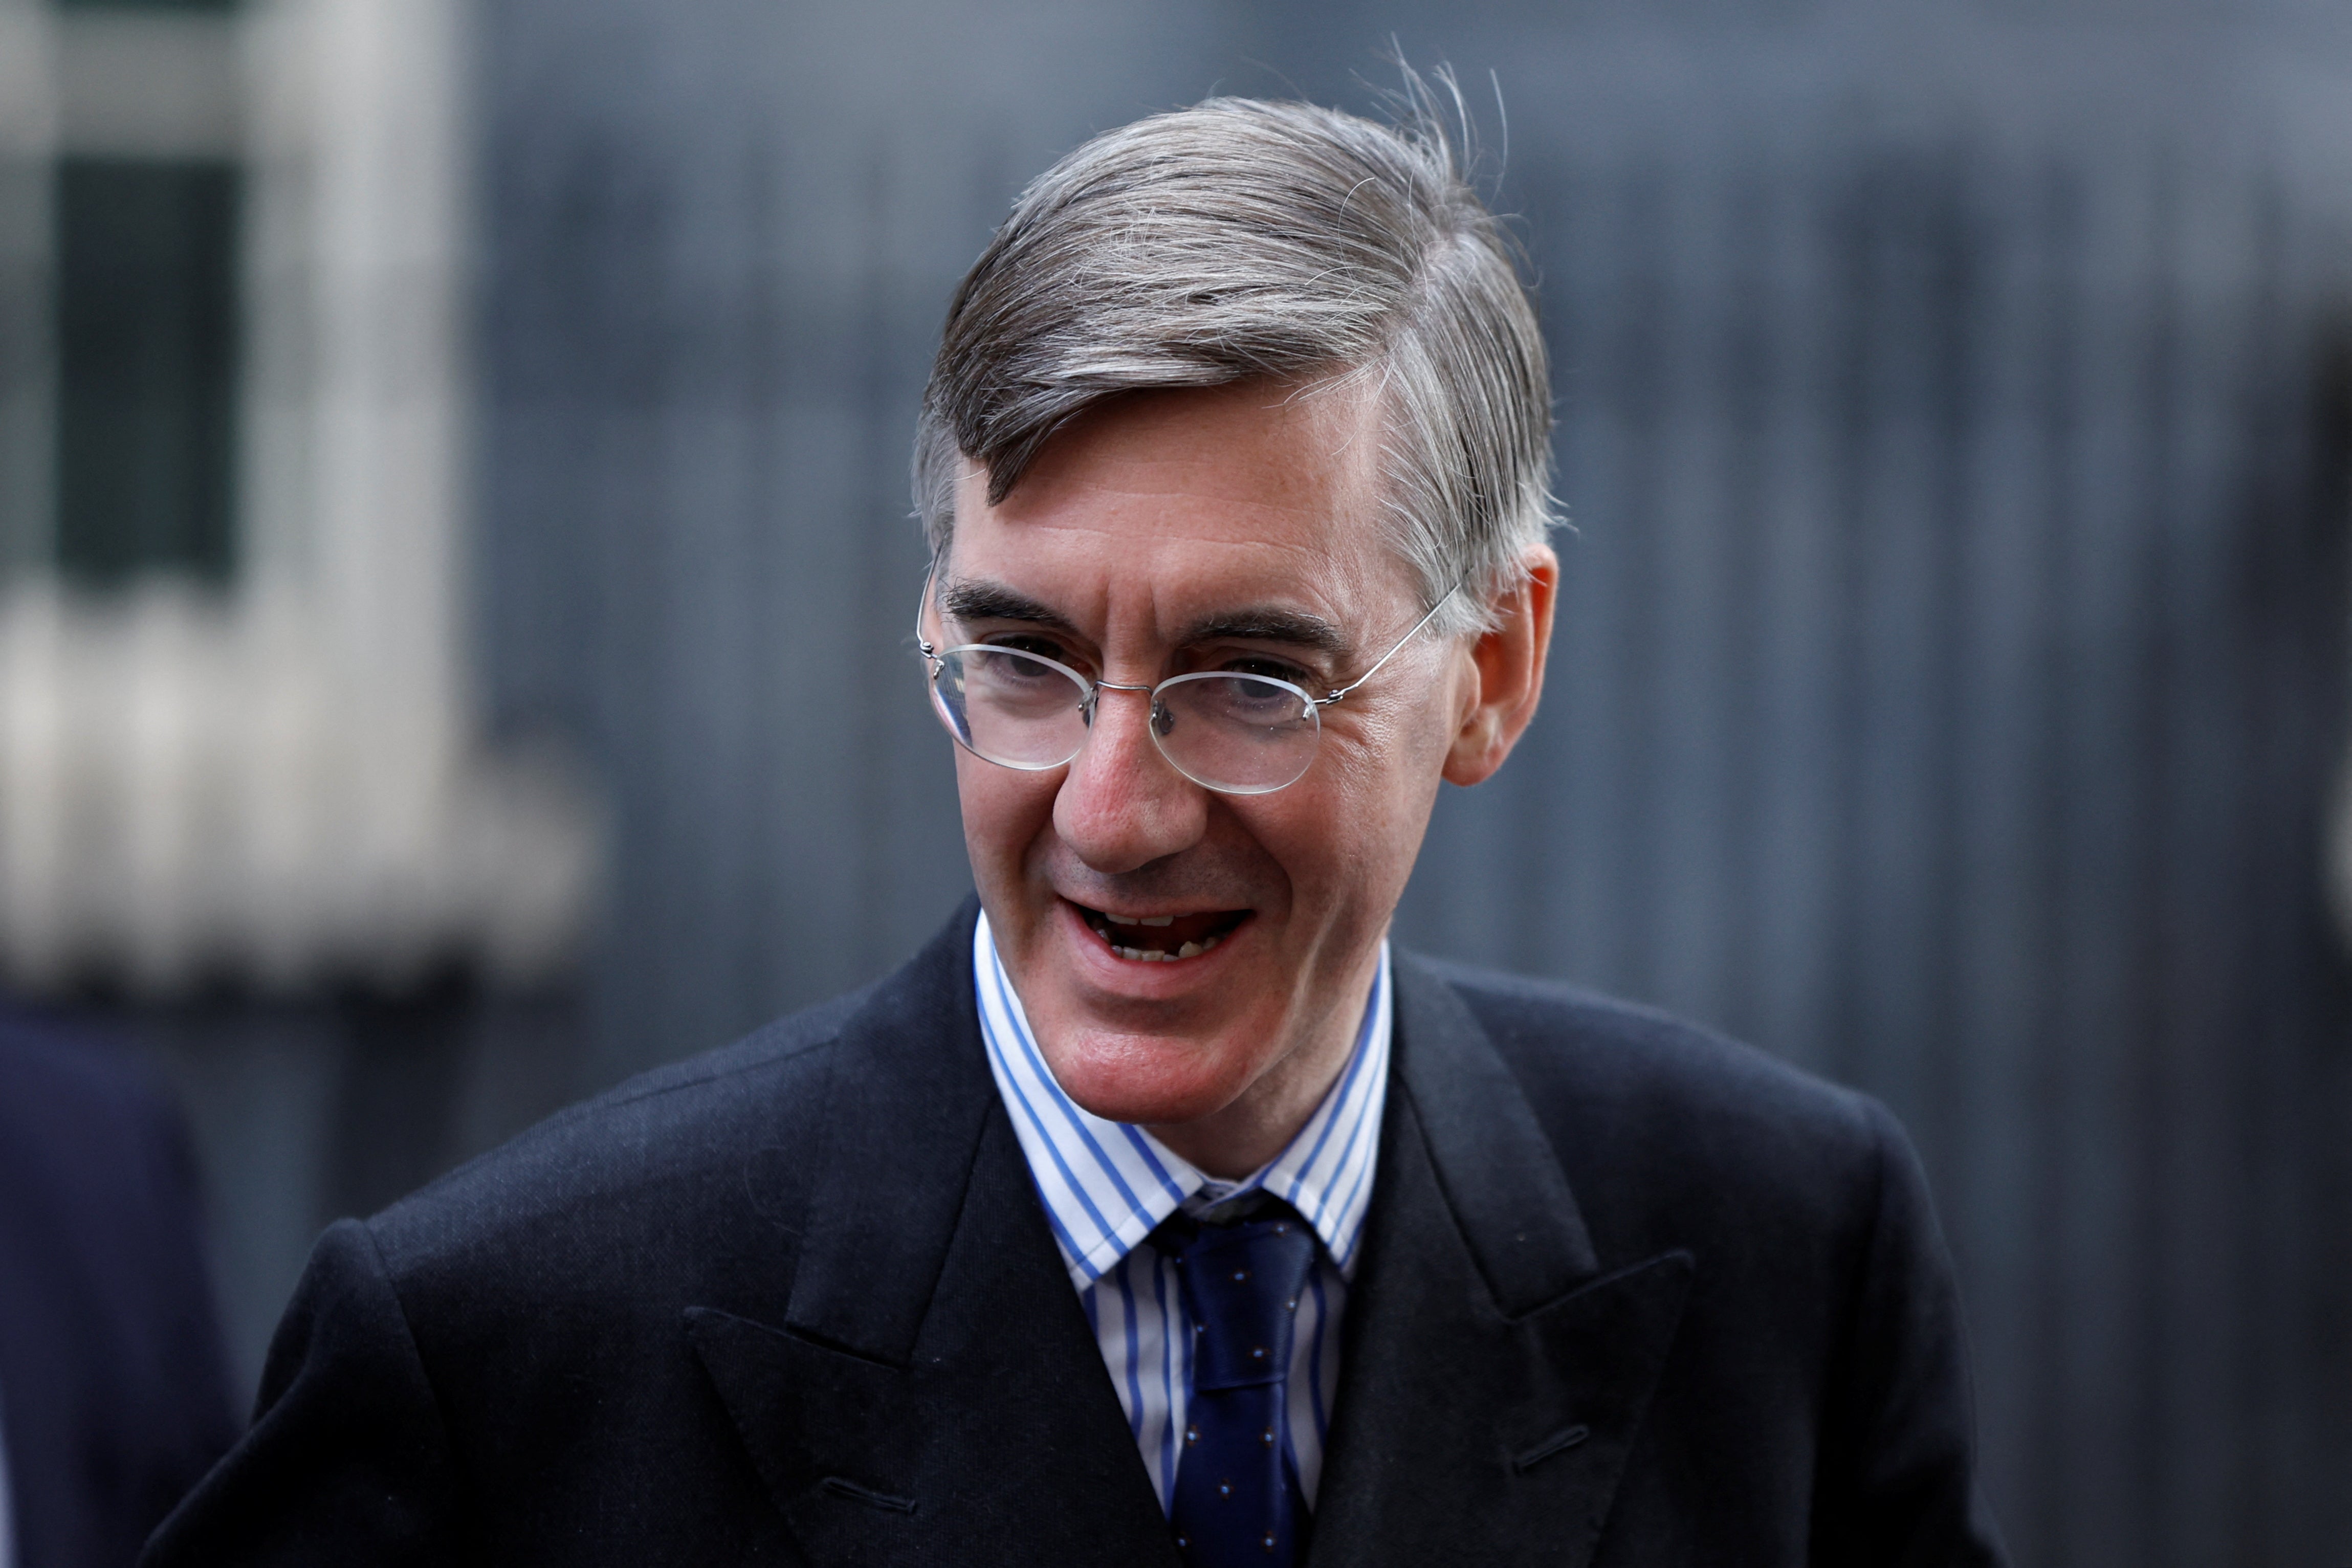 Jacob Rees-Mogg’s energy relief business scheme doesn’t provide business with long-term certainty